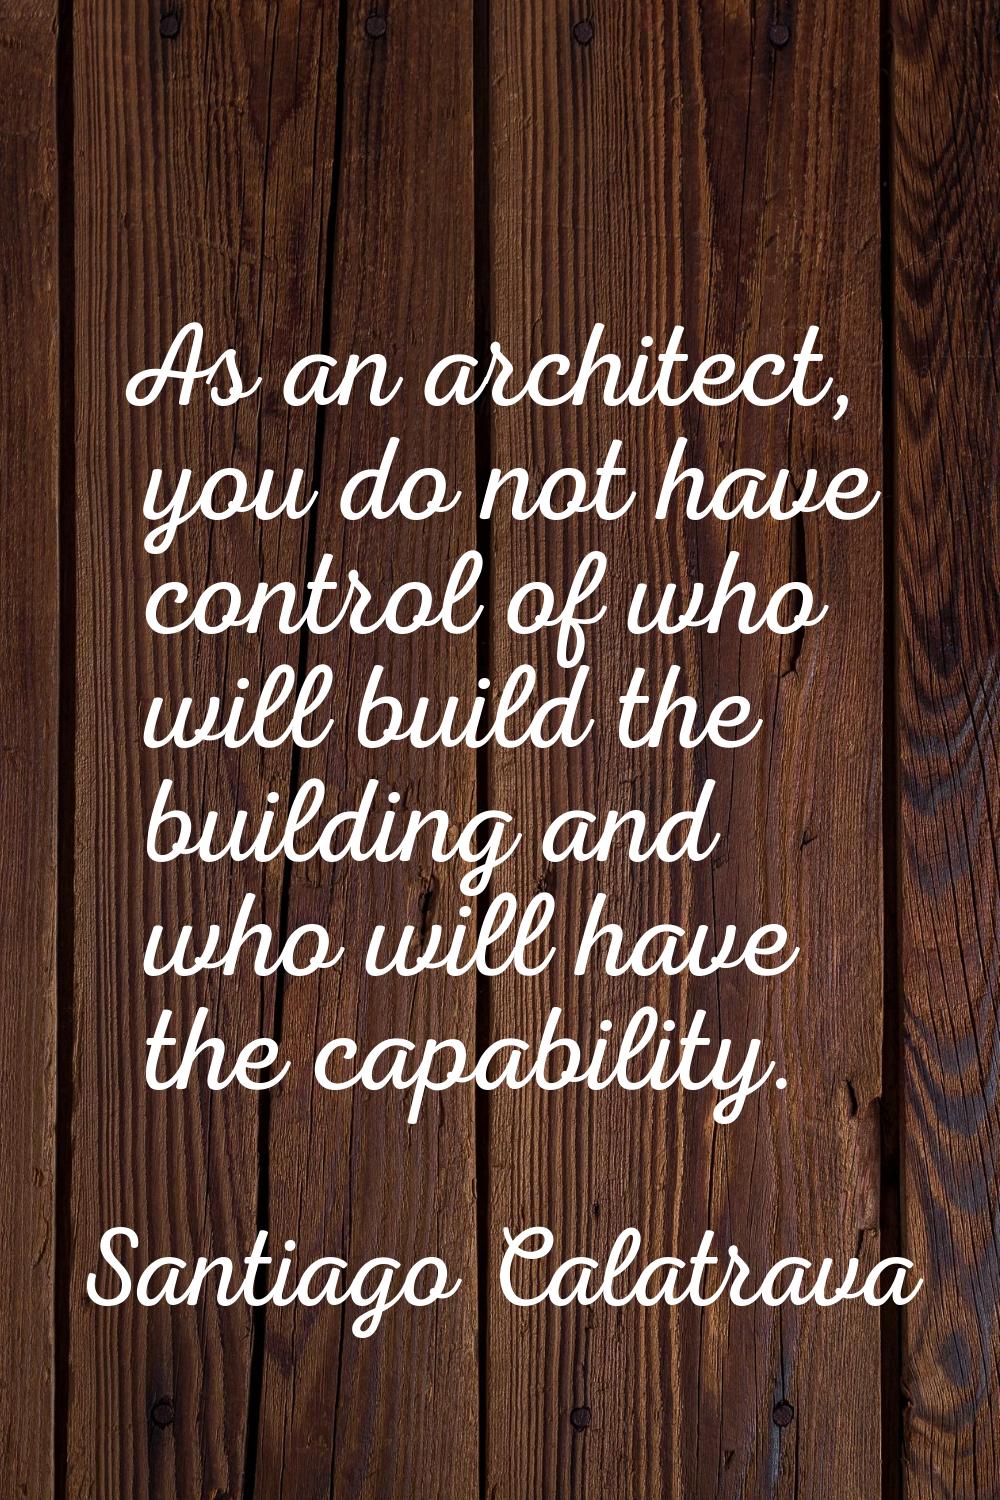 As an architect, you do not have control of who will build the building and who will have the capab